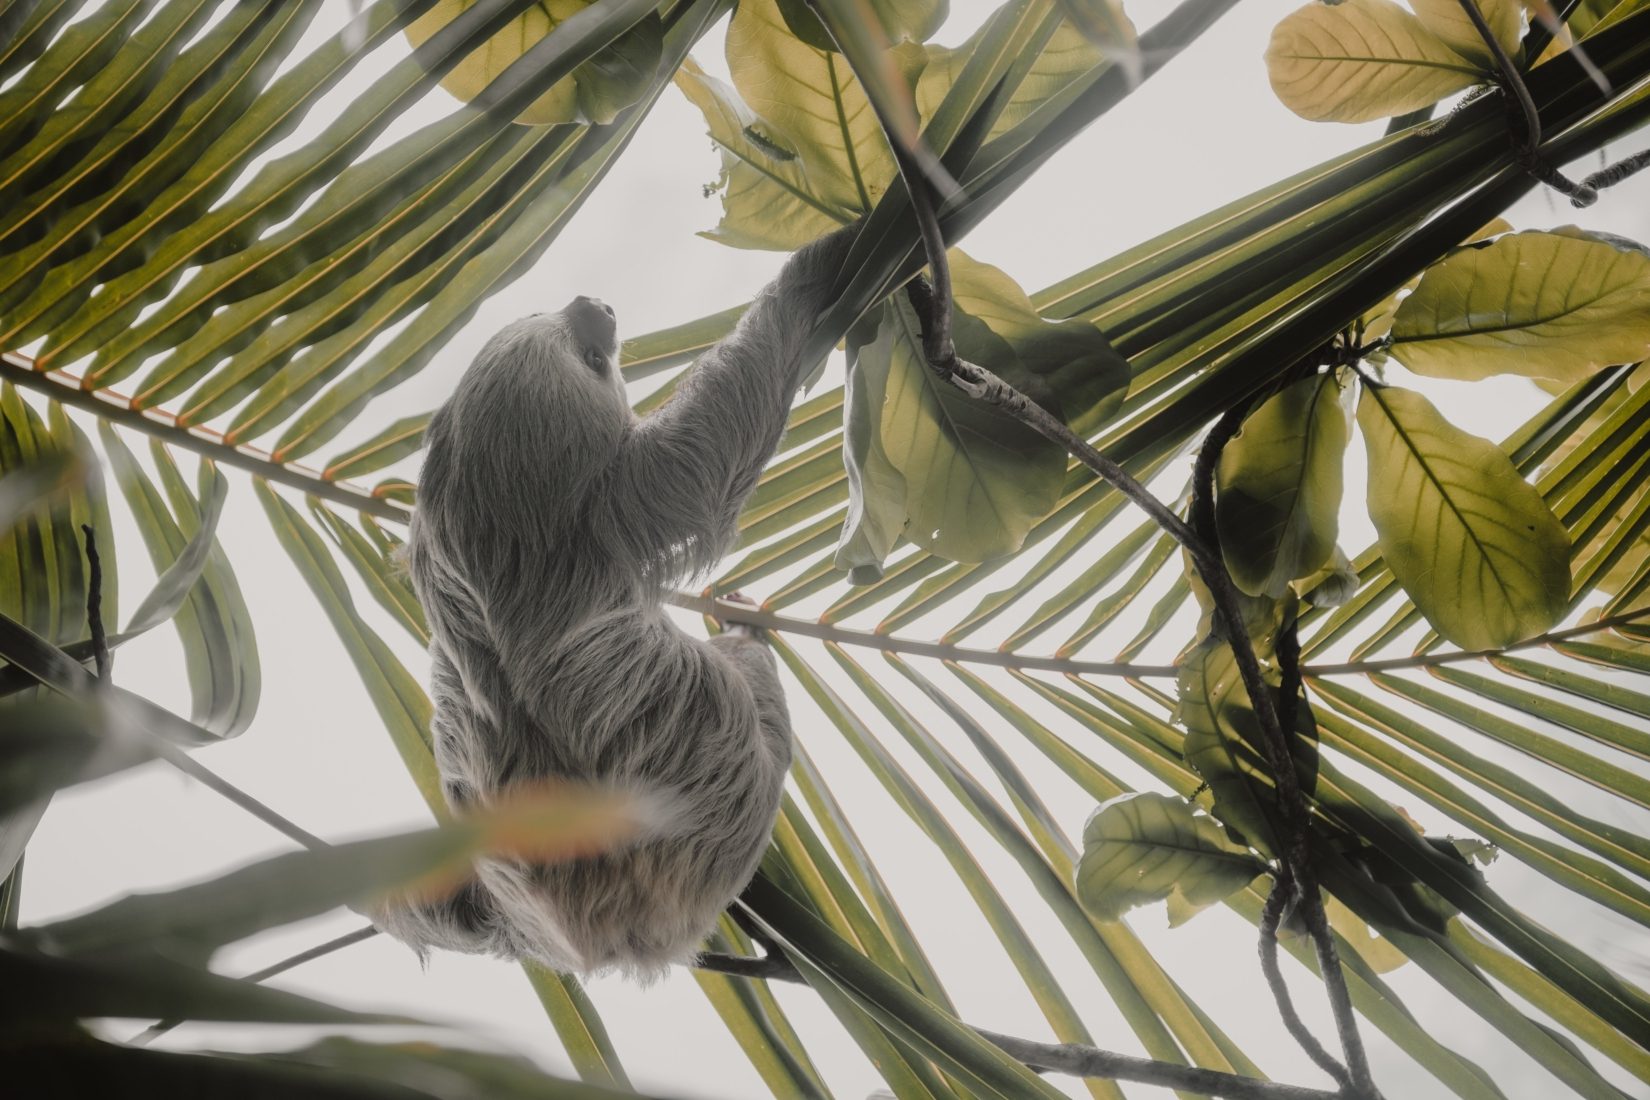 A sloth hangs upside-down from the lush greenery highlighting the biodiversity of Central America